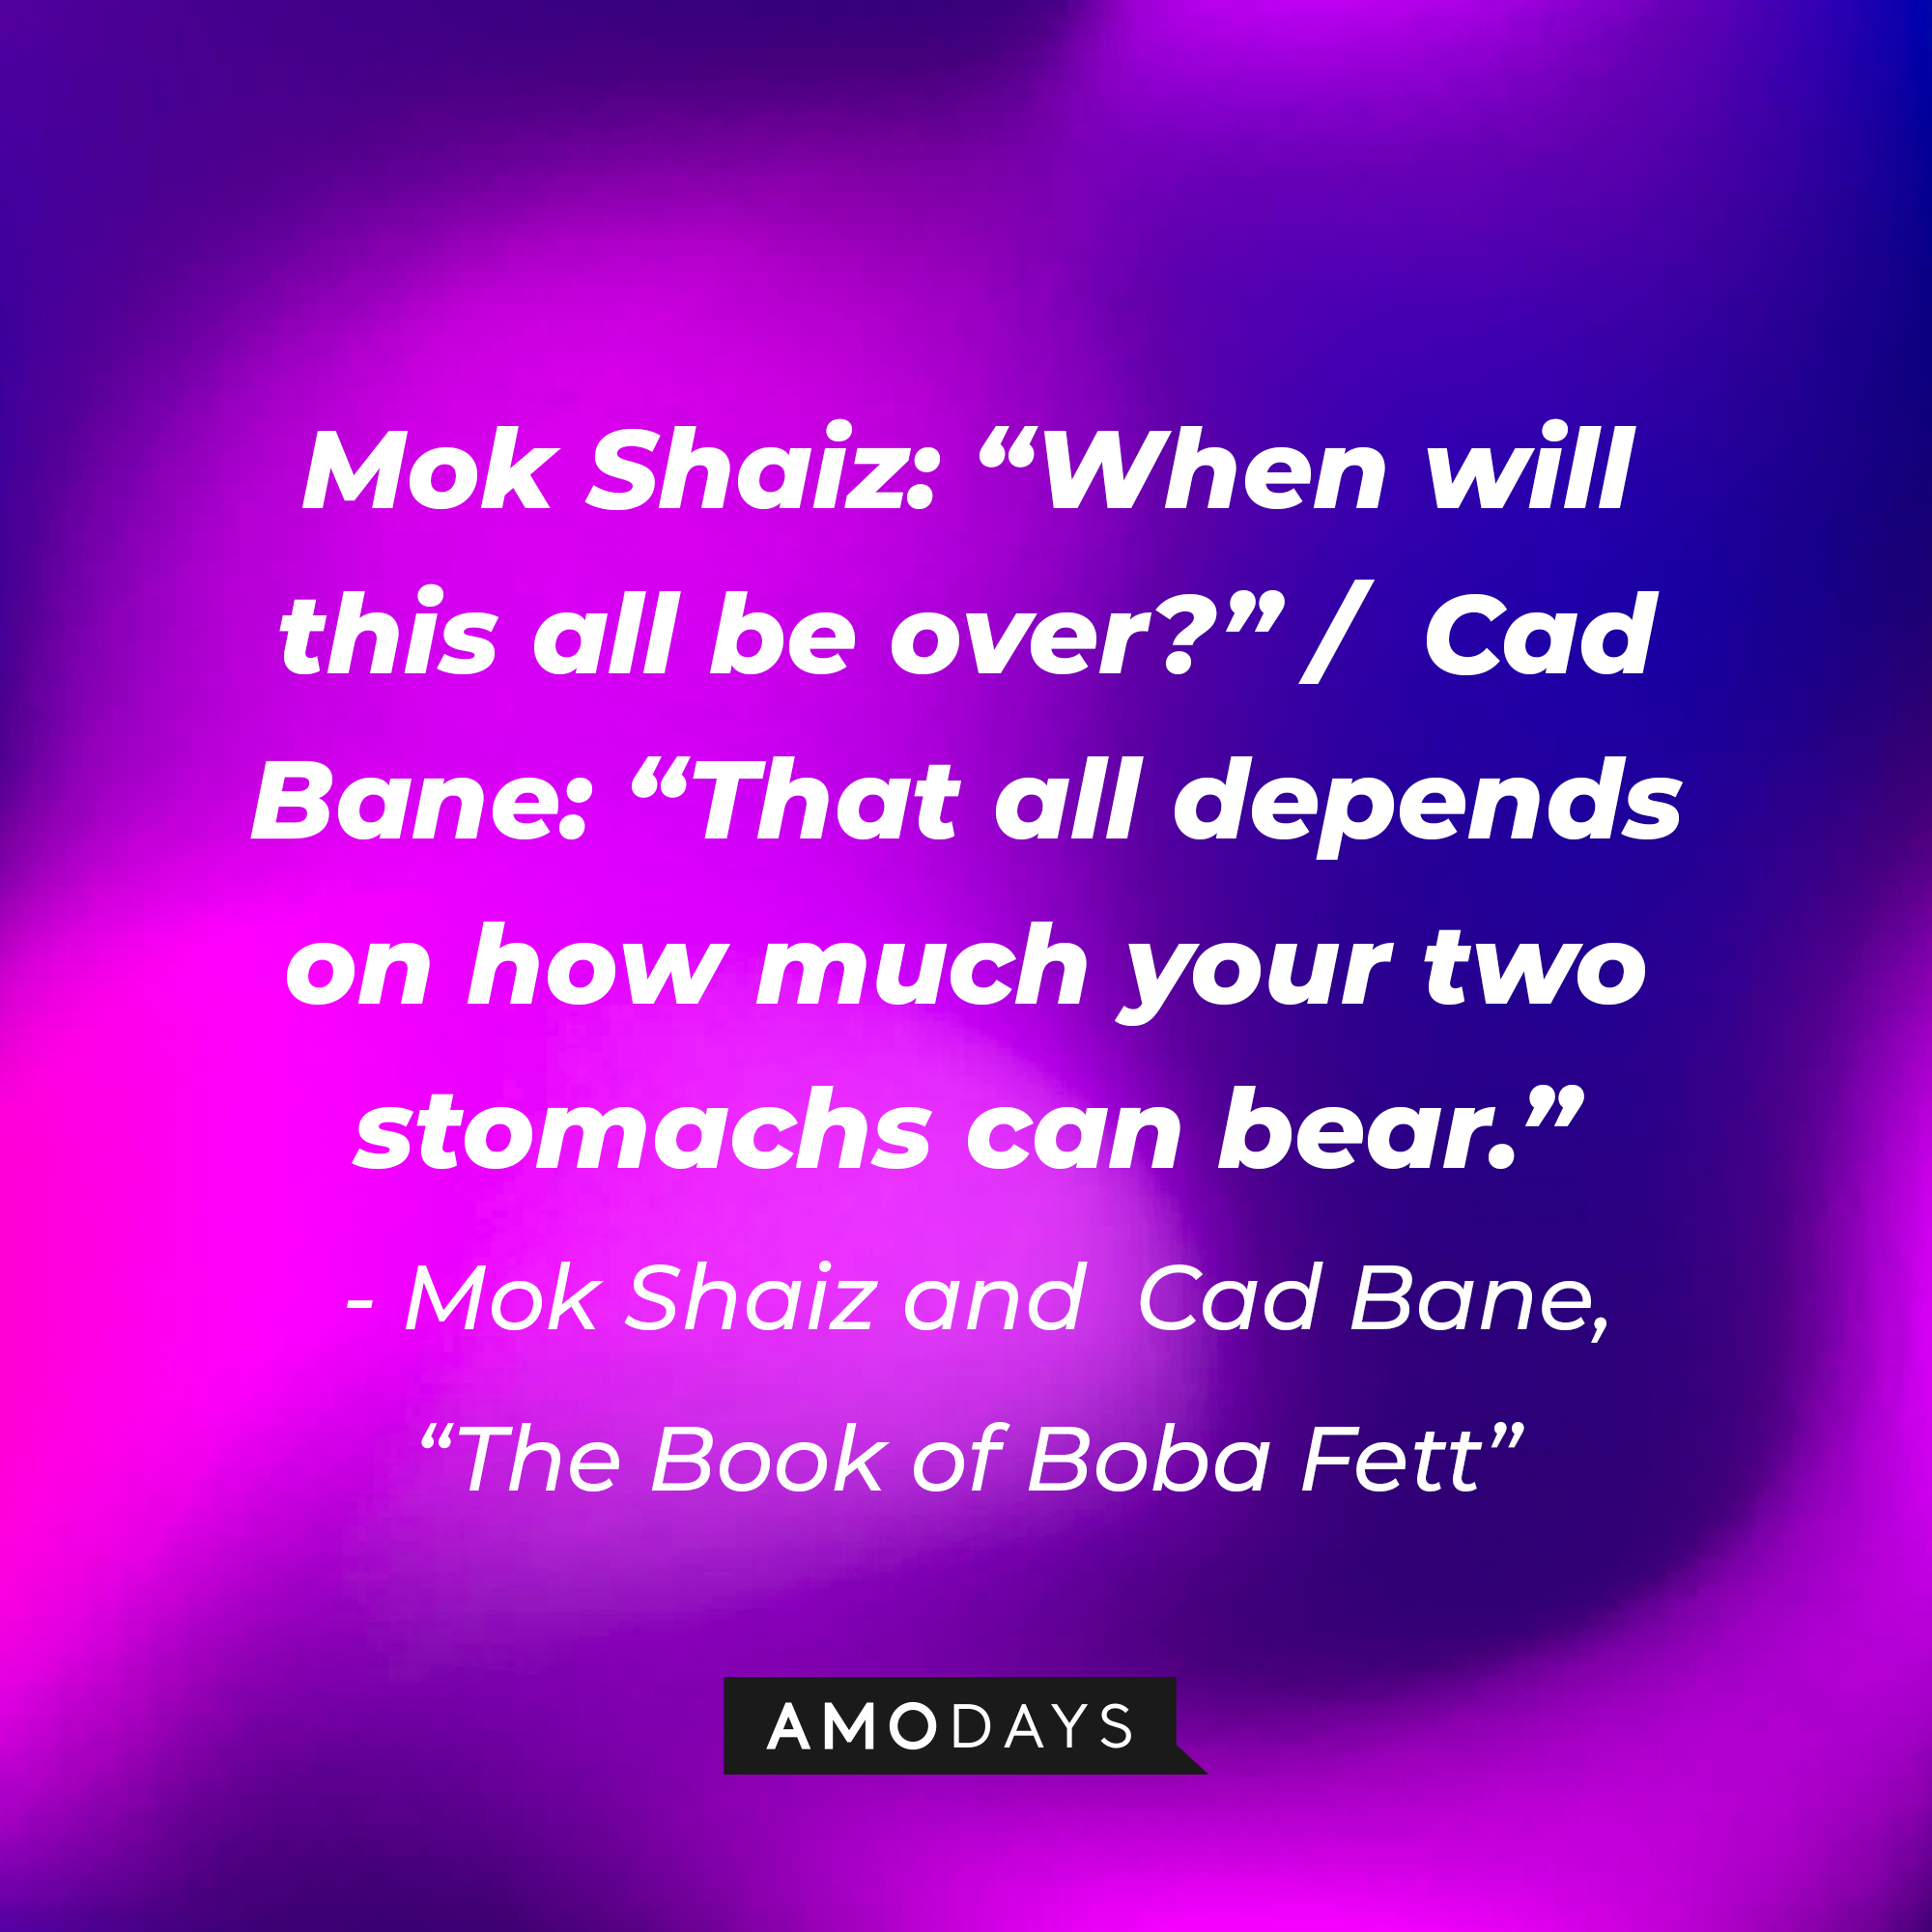 Mok Shaiz and  Cad Bane’s quotes:  Mok Shaiz: "When will this all be over?" /  Cad Bane: "That all depends on how much your two stomachs can bear." | Image: AmoDays